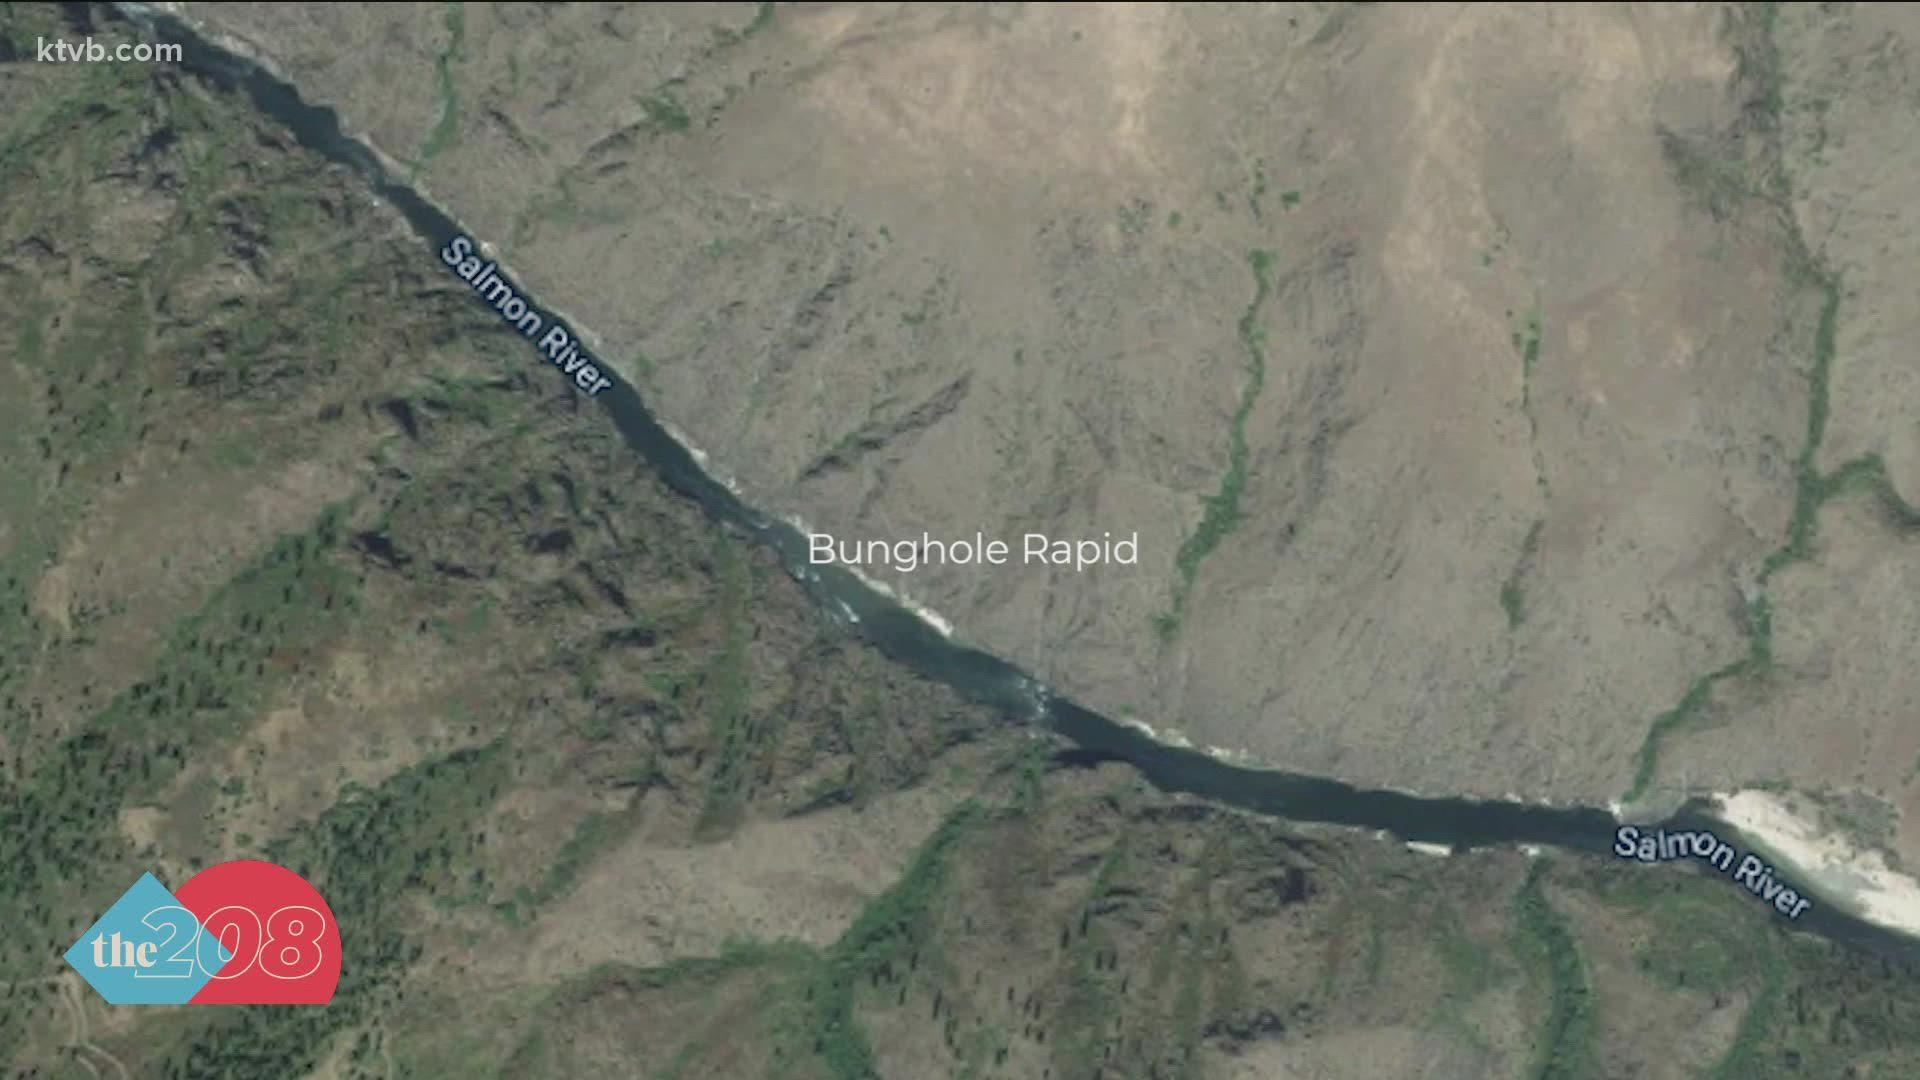 Places in Idaho have names stretching from the very original Idaho City to the borderline inappropriate, like Bunghole Rapids.